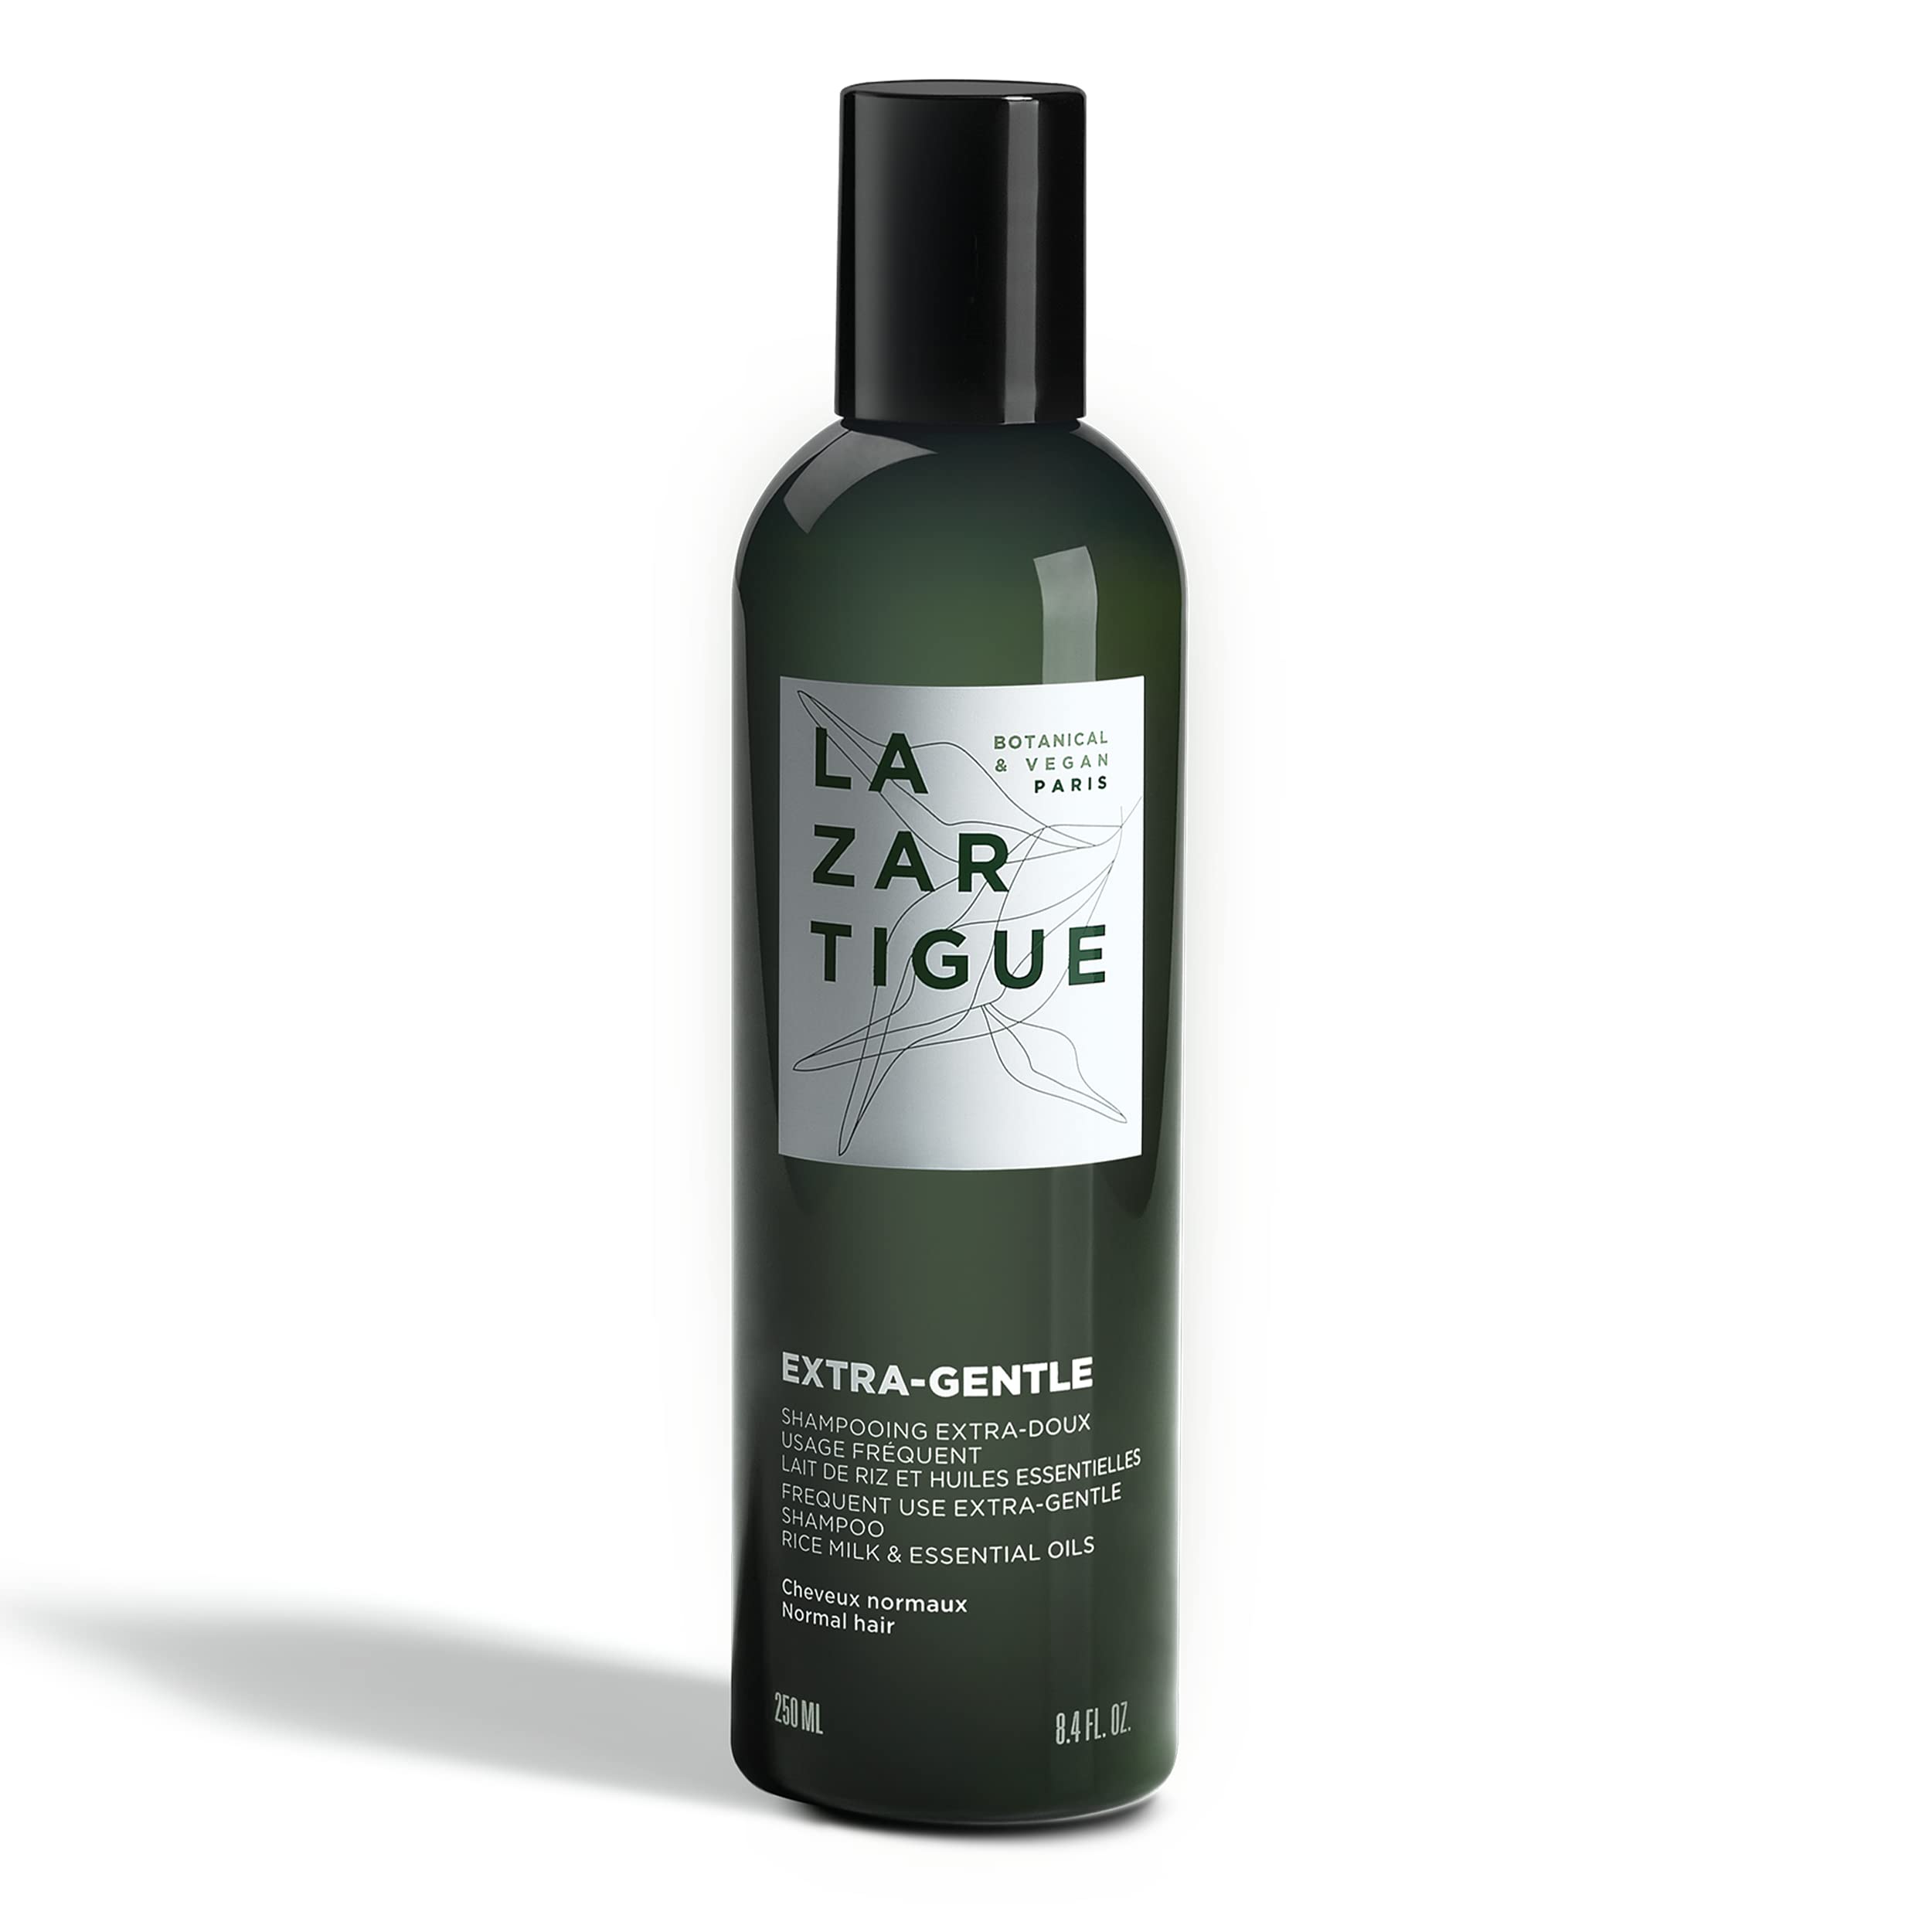 Lazartigue Extra-Gentle Shampoo, Frequent Use Extra-Gentle Shampoo, Cleanses Hair, Gentle on Scalp, Leaves Hair Soft, Supple and Shiny, Perfect for Everyday Usage